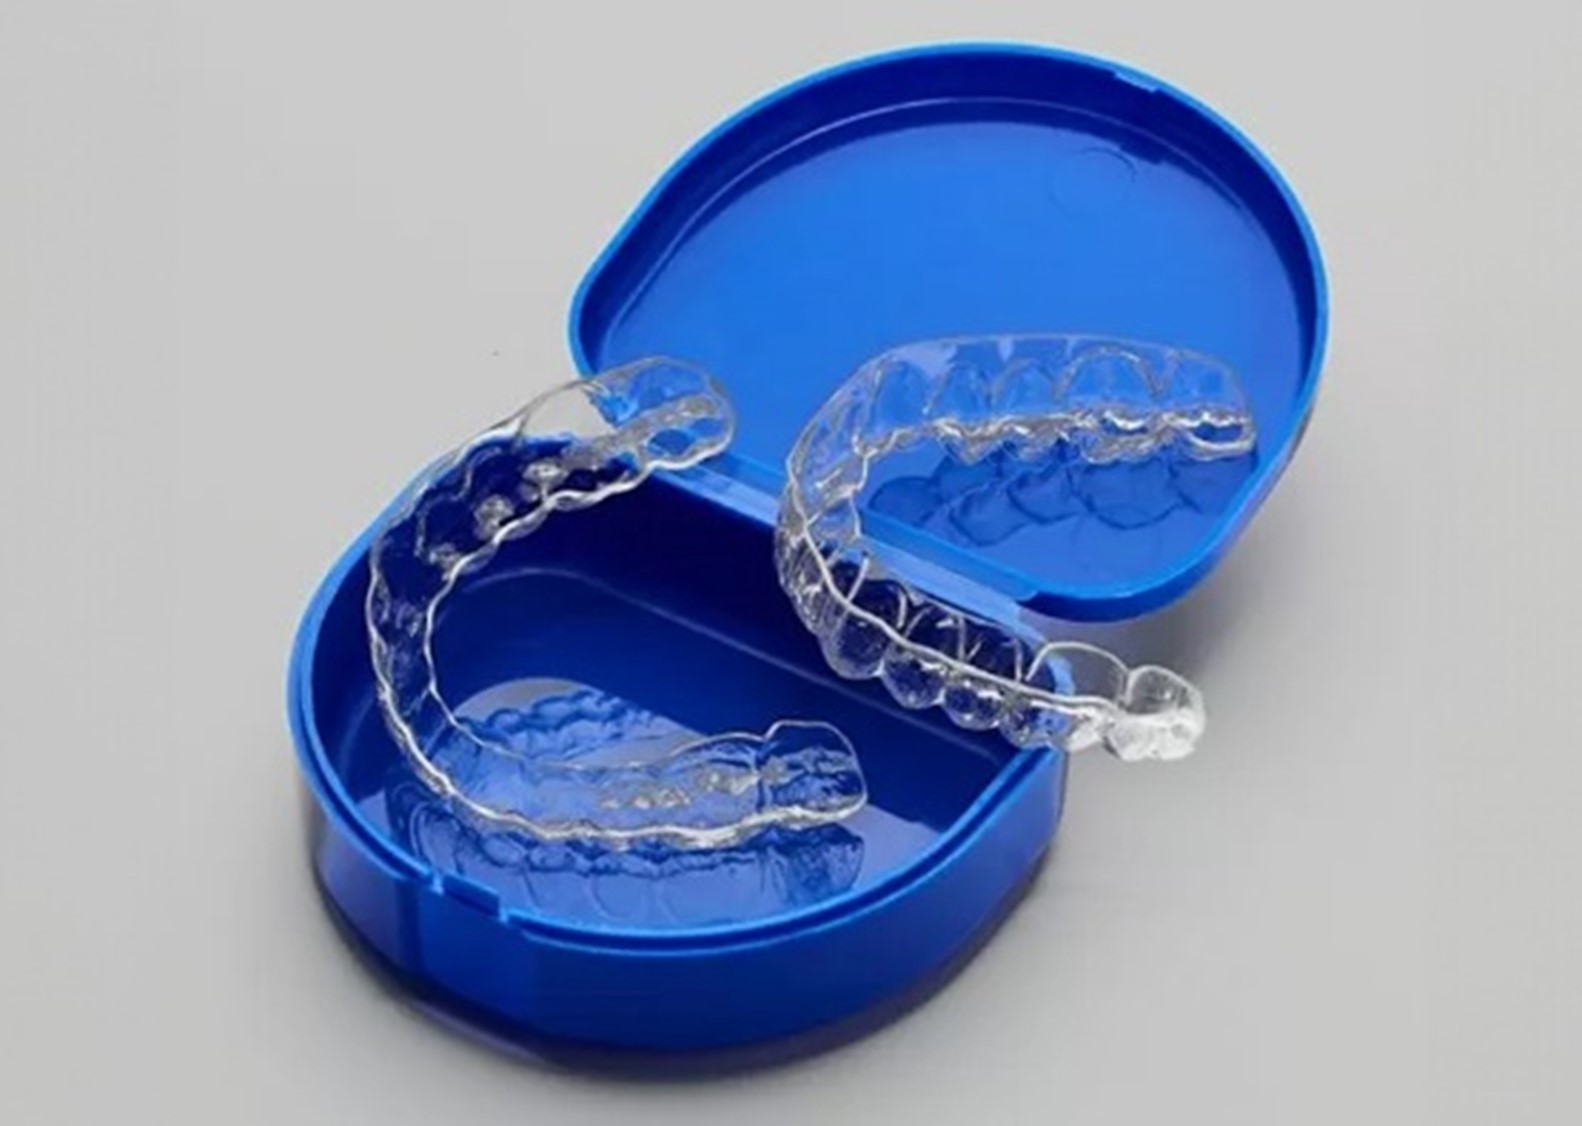 a clear retainer in a blue case